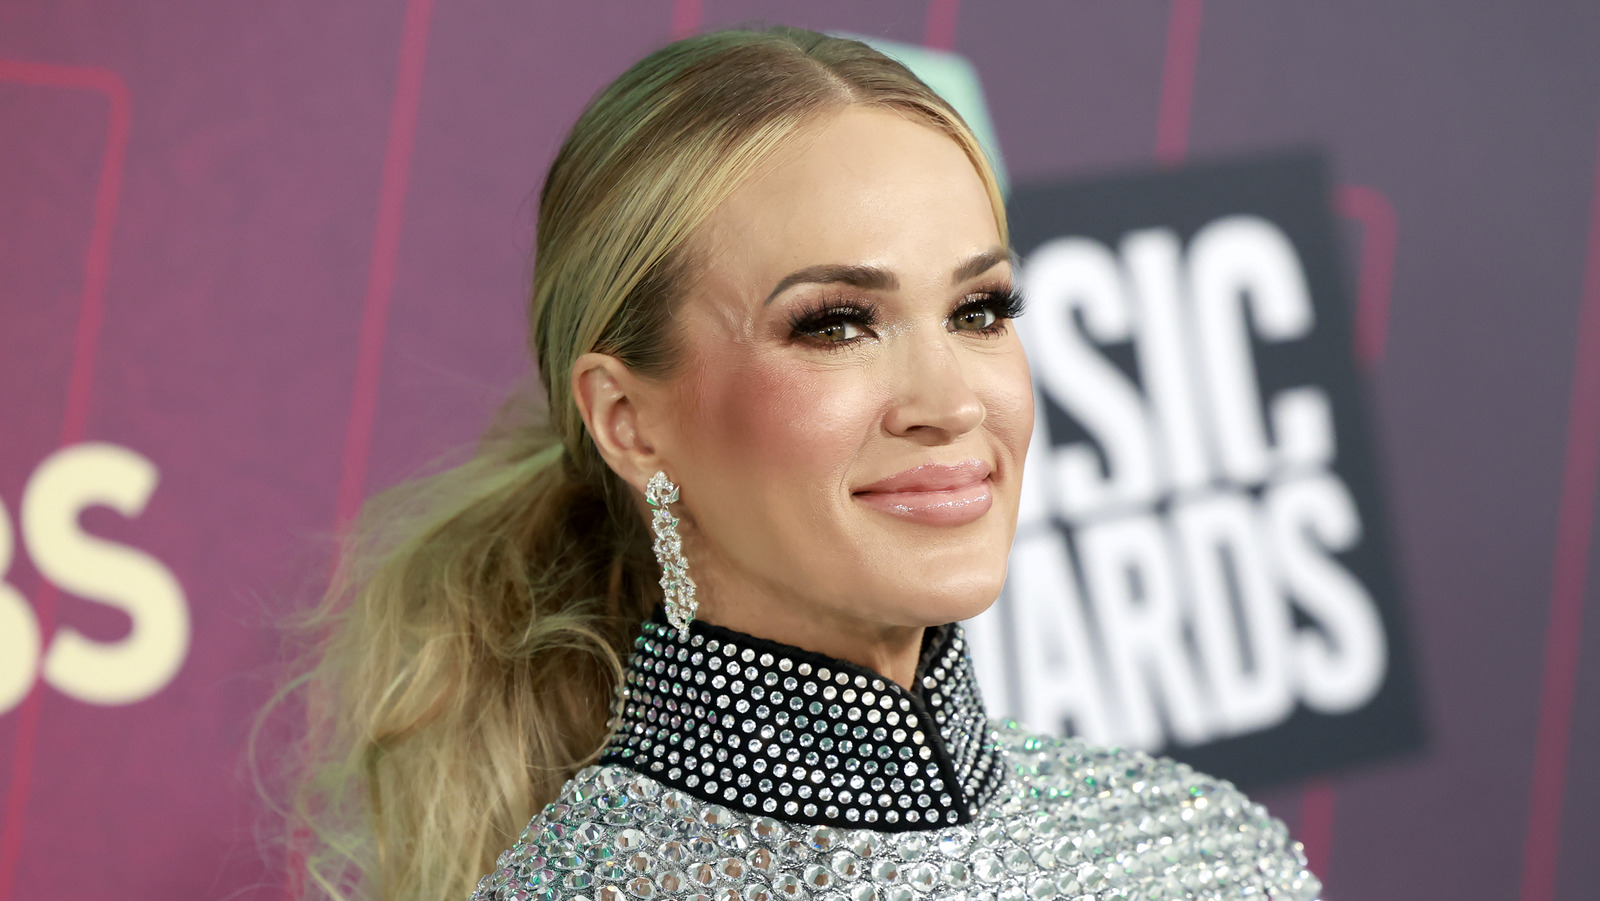 Carrie Underwood's 2023 CMT Awards Look Gives Her The Biggest Leg Up On